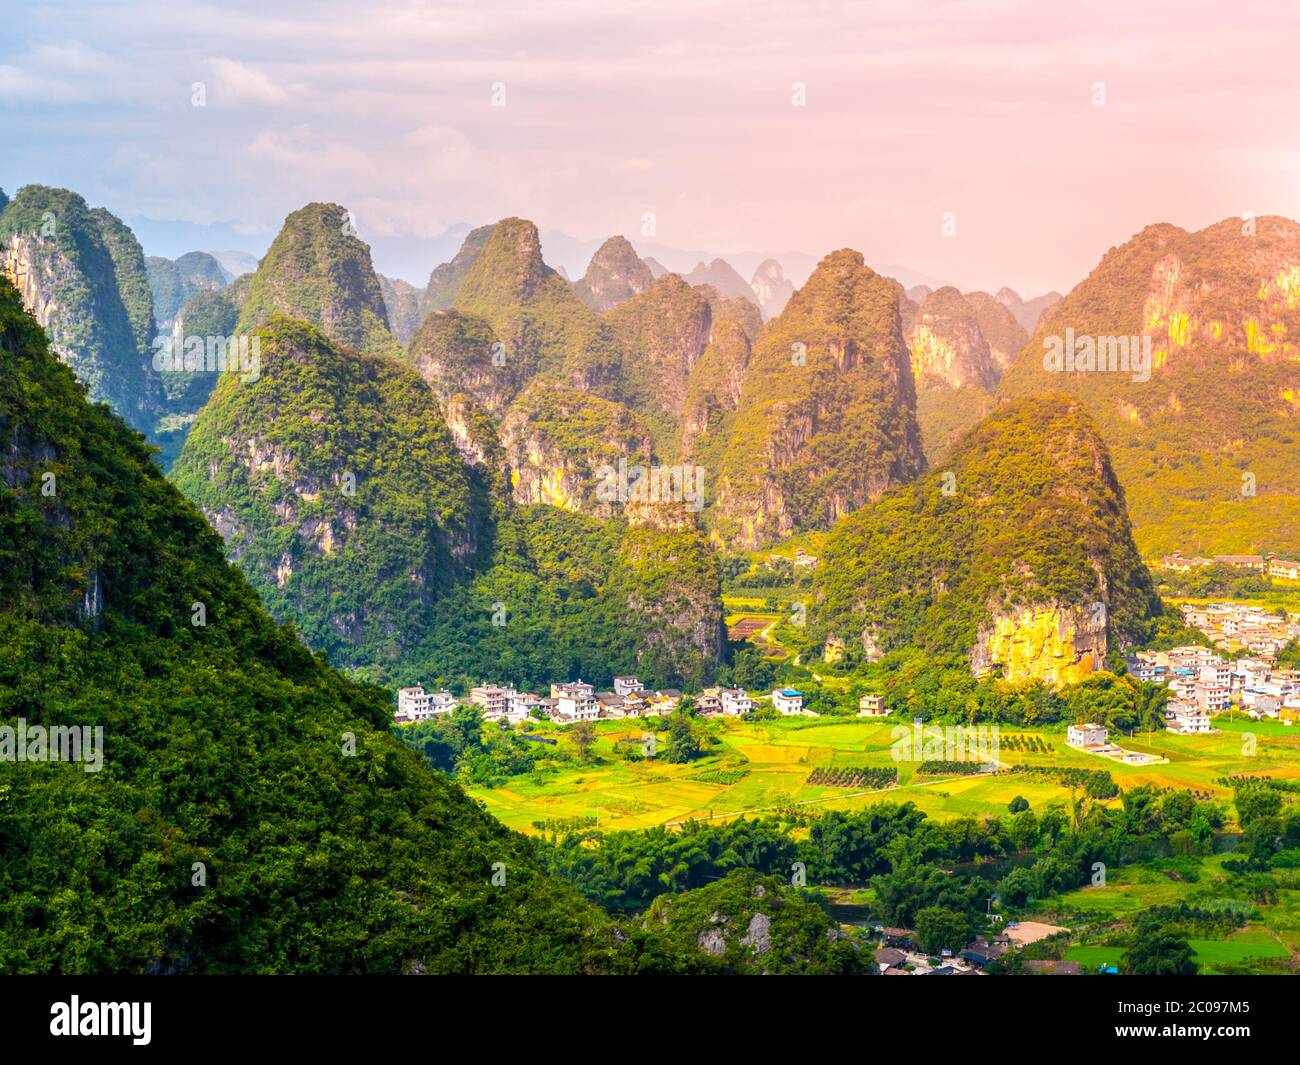 Panoramic view of landscape with karst peaks around Yangshuo County and Li River, Guangxi Province, China. Stock Photo